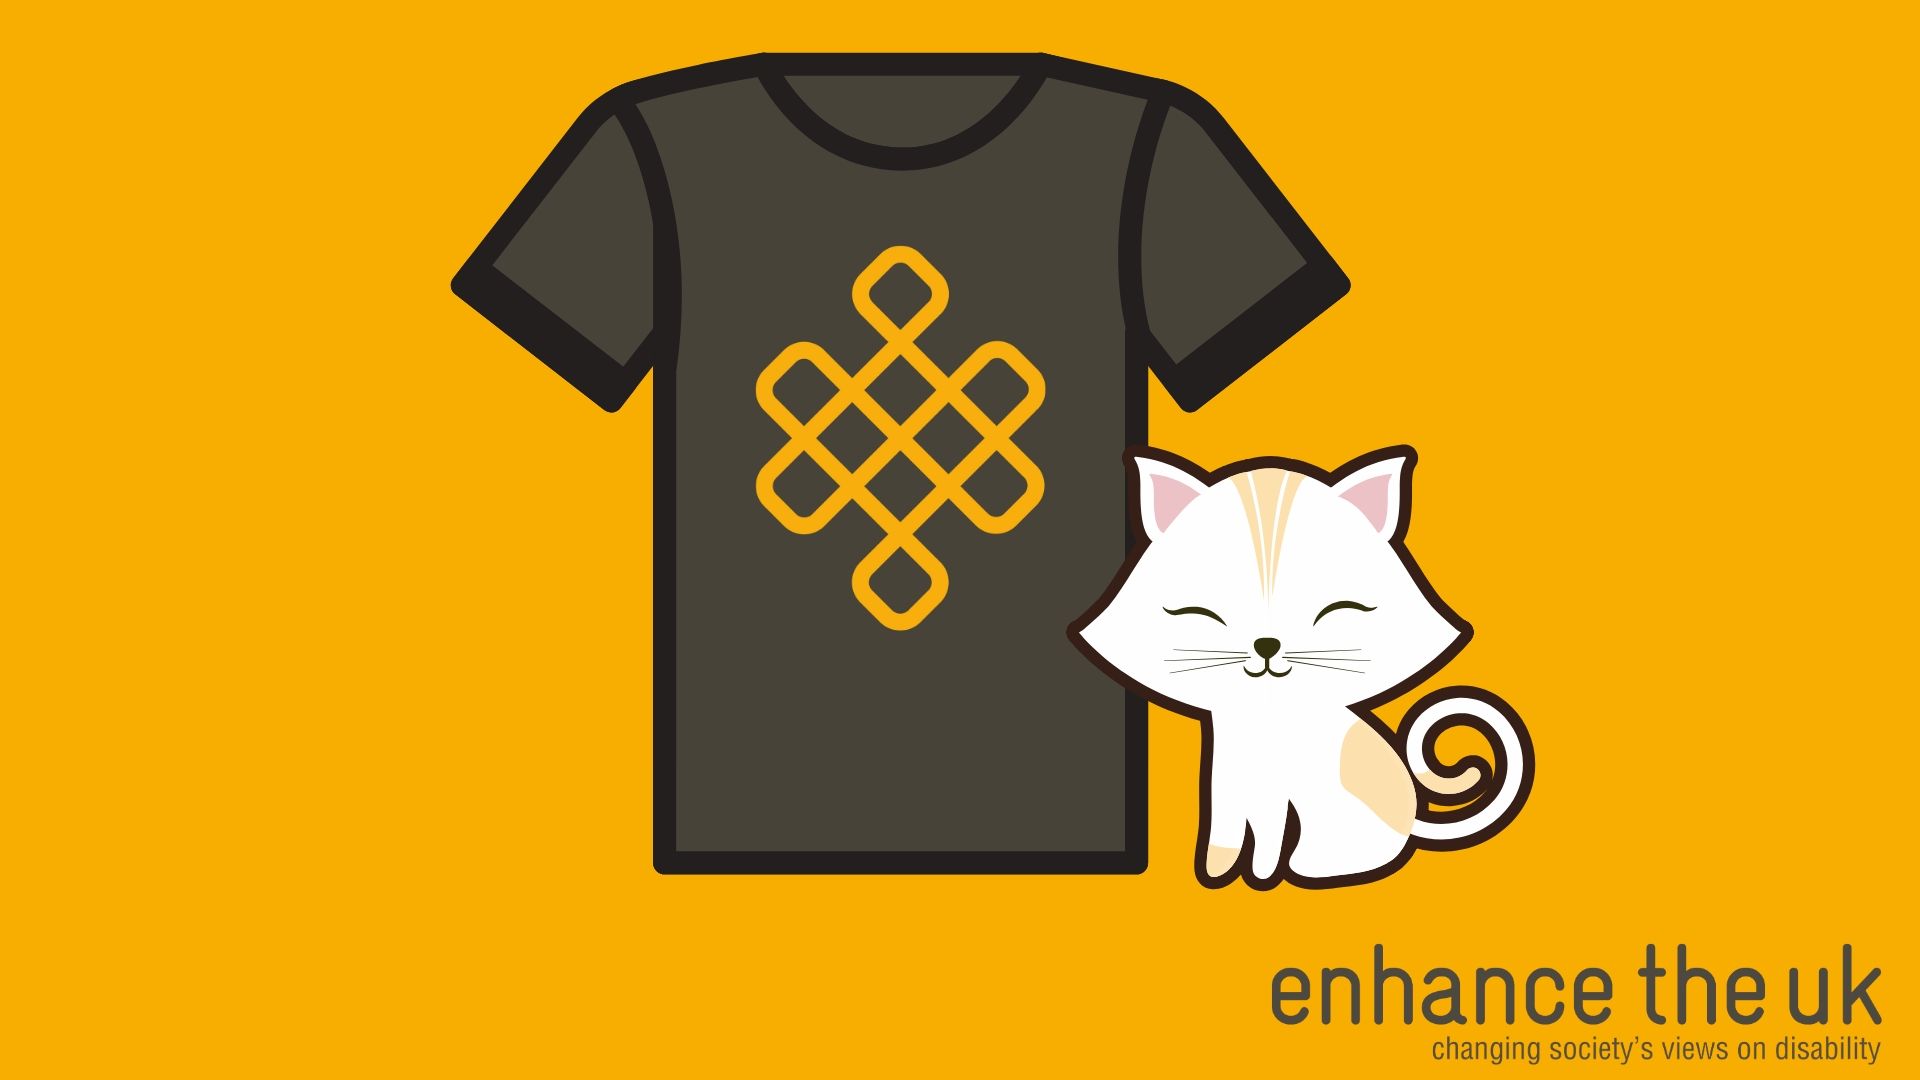 A black T-shirt with the Enhance The UK logo and a white cartoon cat